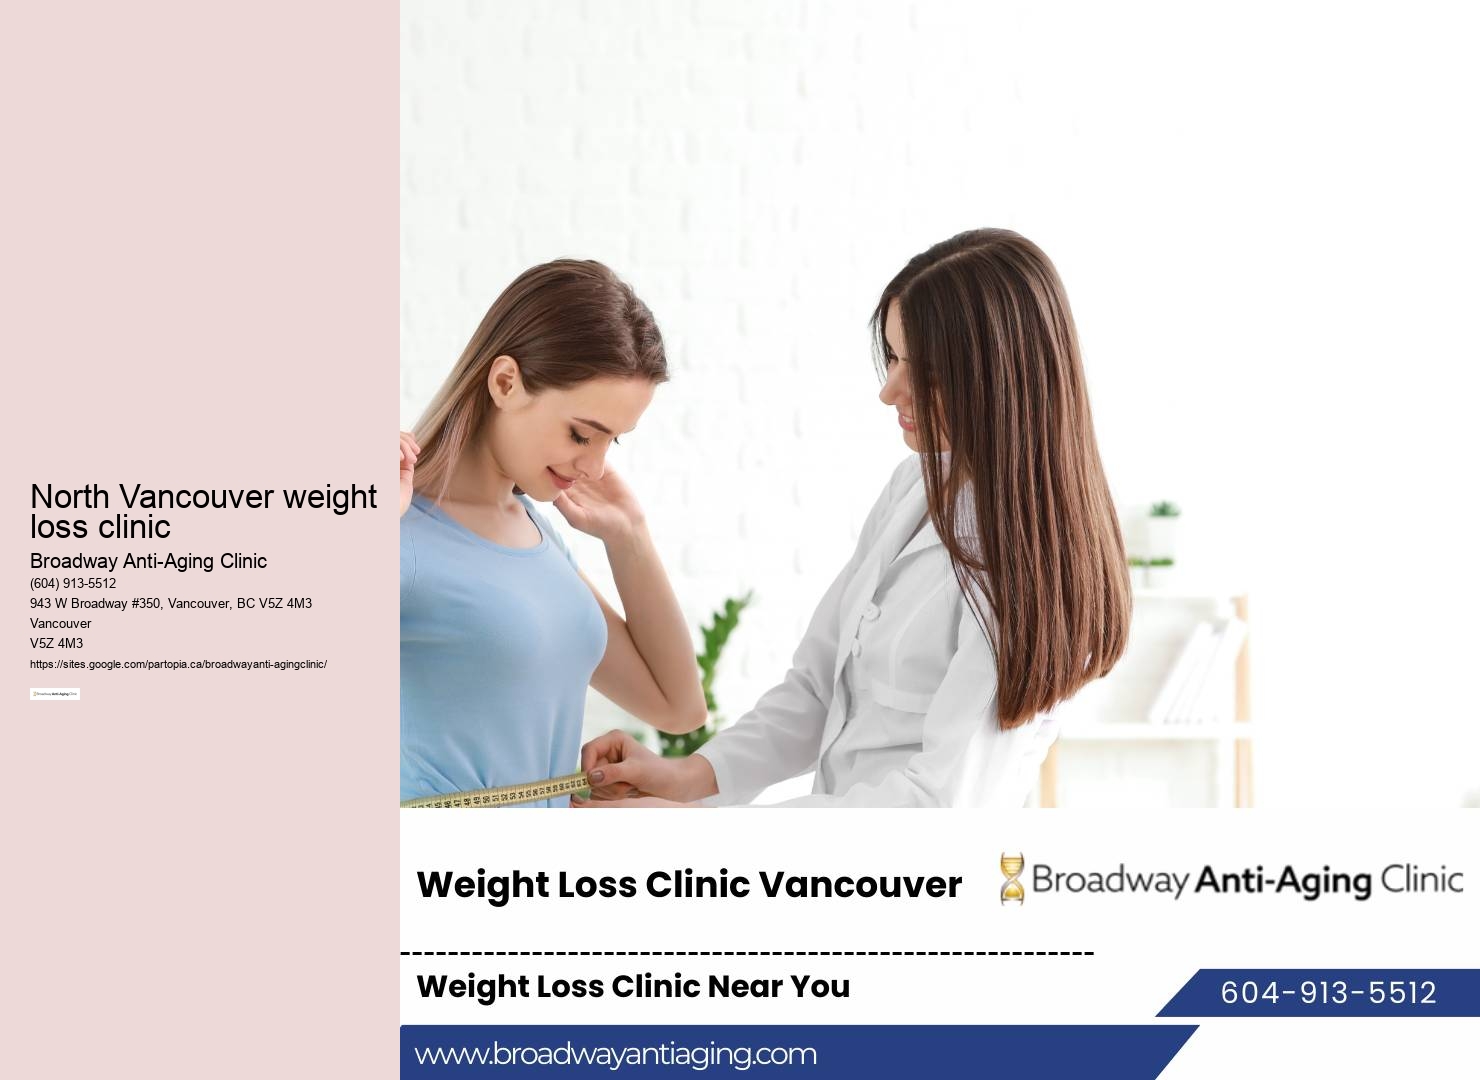 North Vancouver weight loss clinic